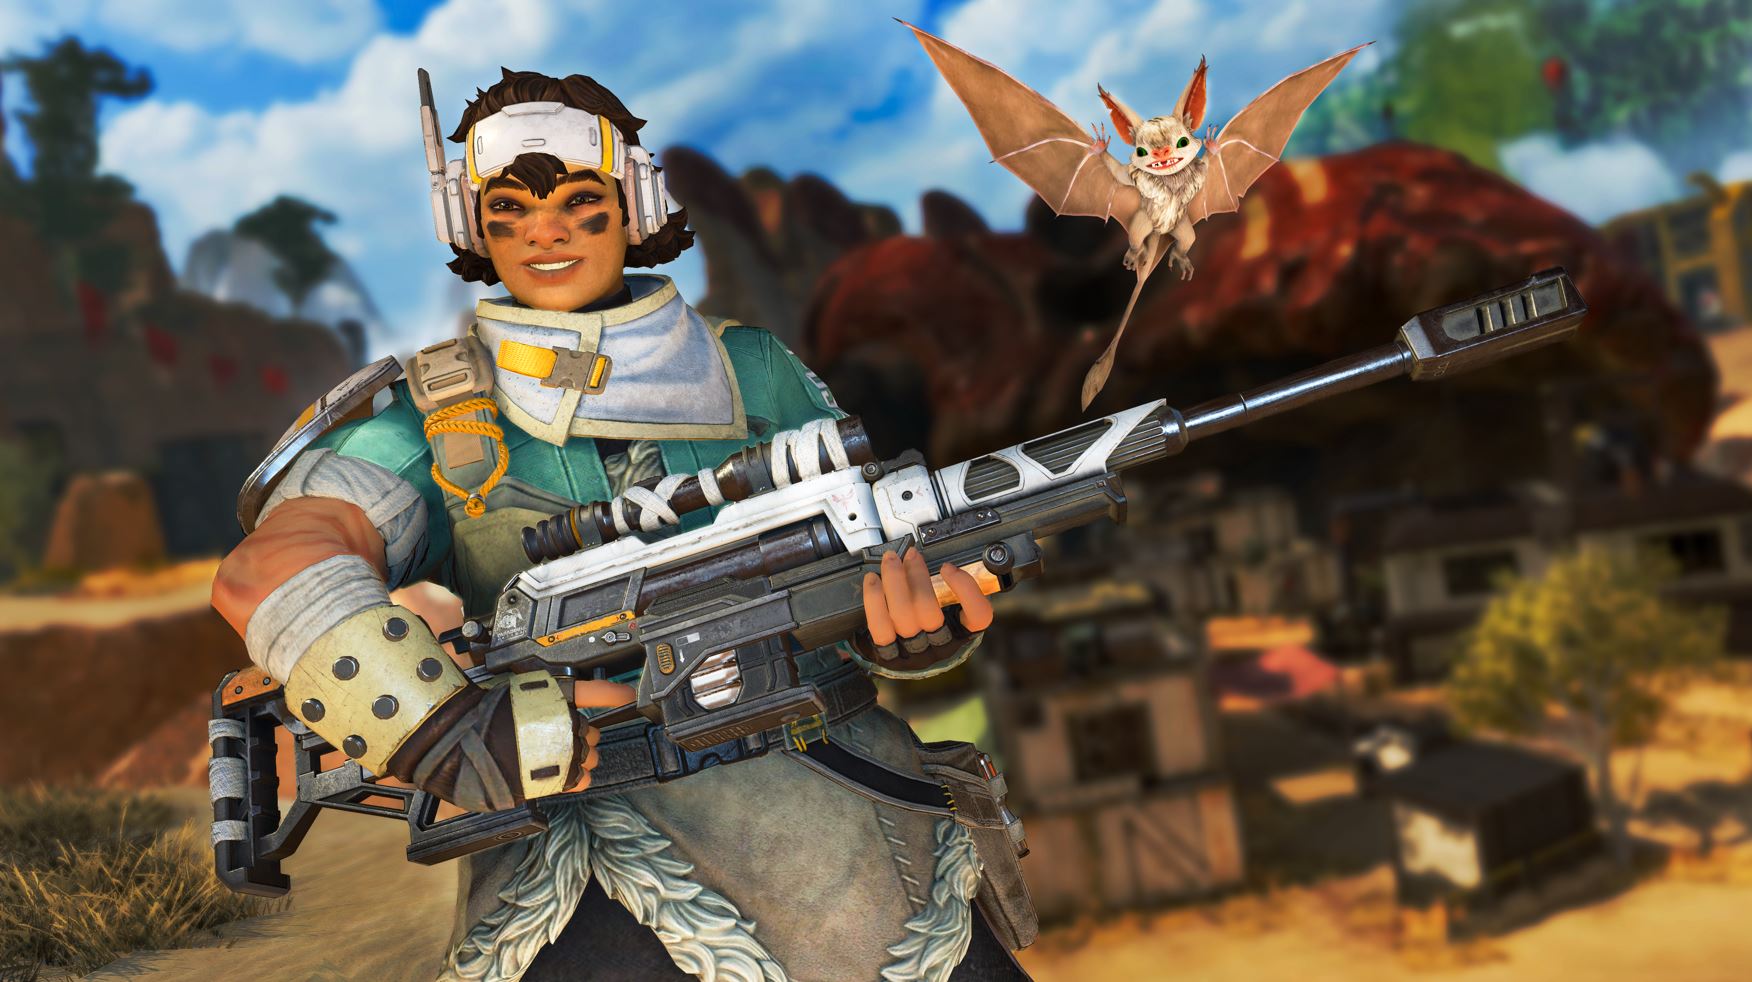 Apex Legends’ newest character is a deadly sniper with an adorable bat pal